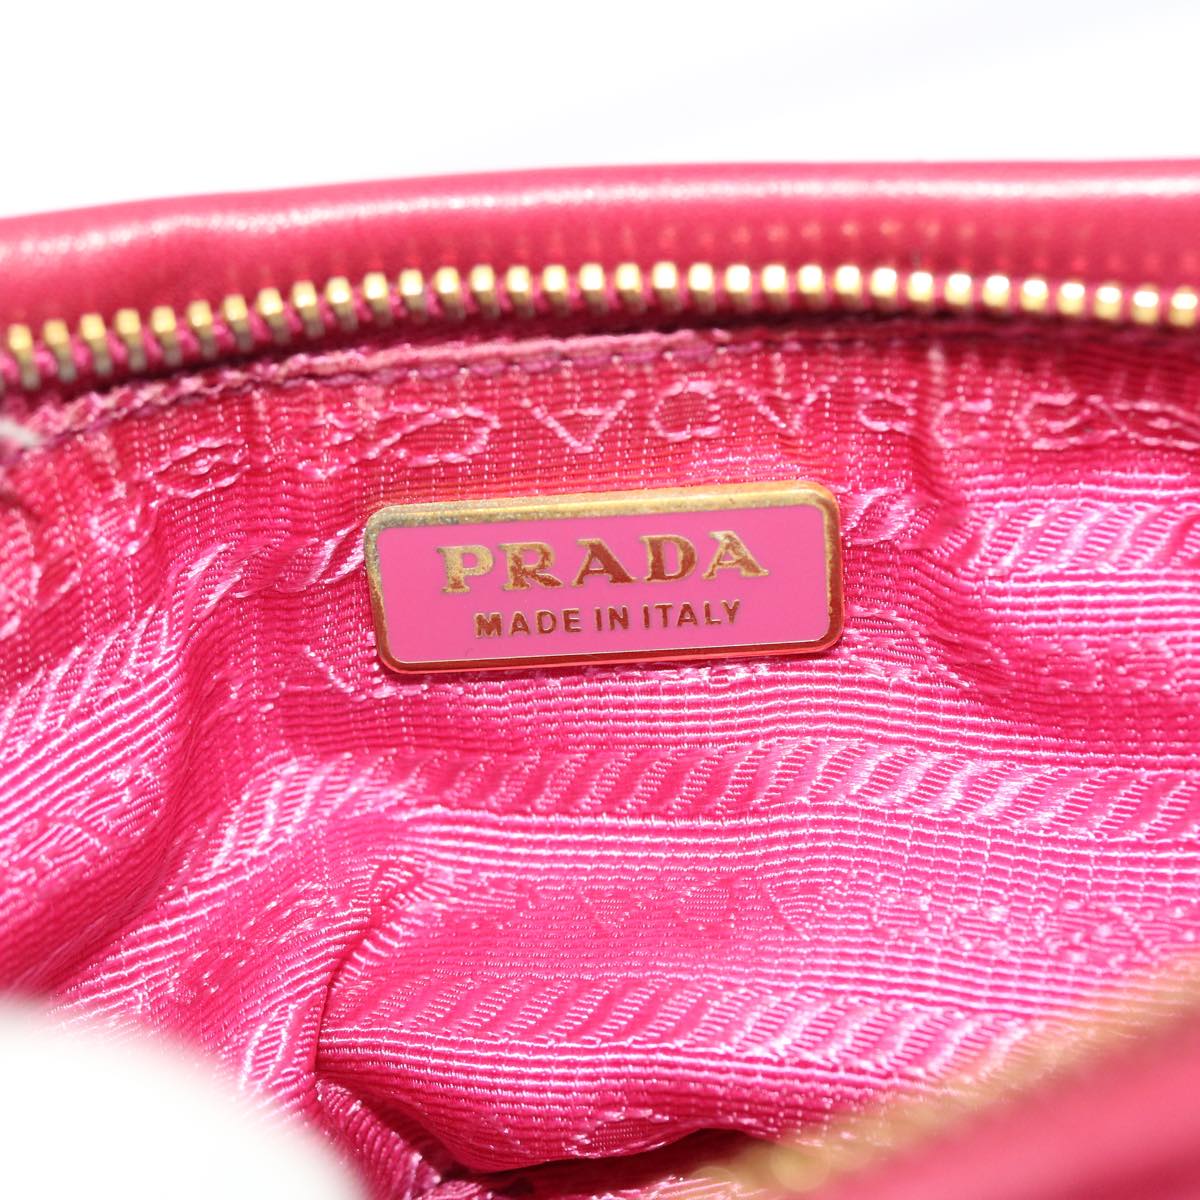 PRADA Ribbon Accessory Pouch Leather Pink Auth 49999